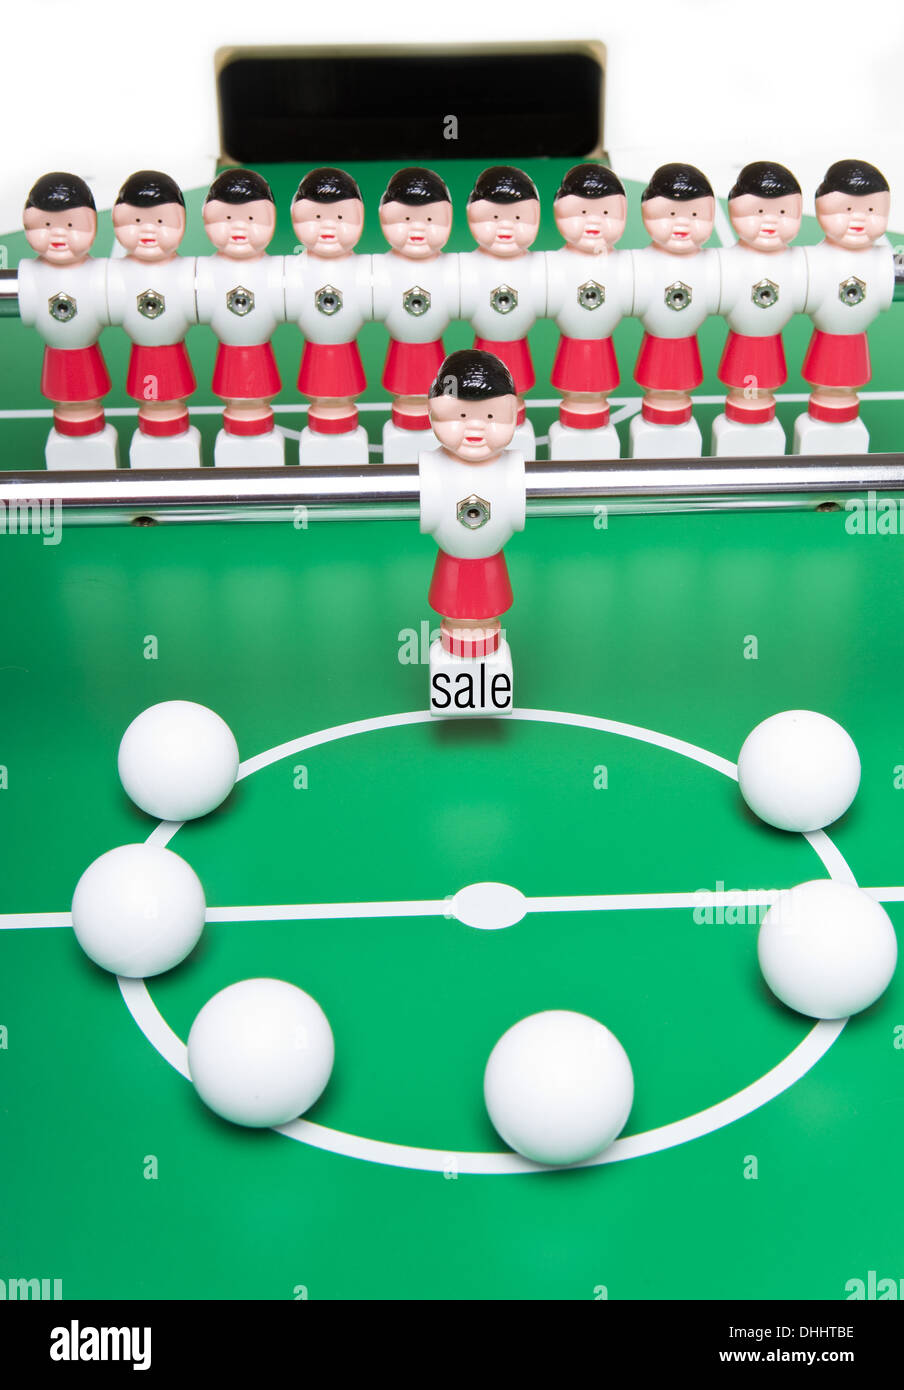 Toy football players Stock Photo